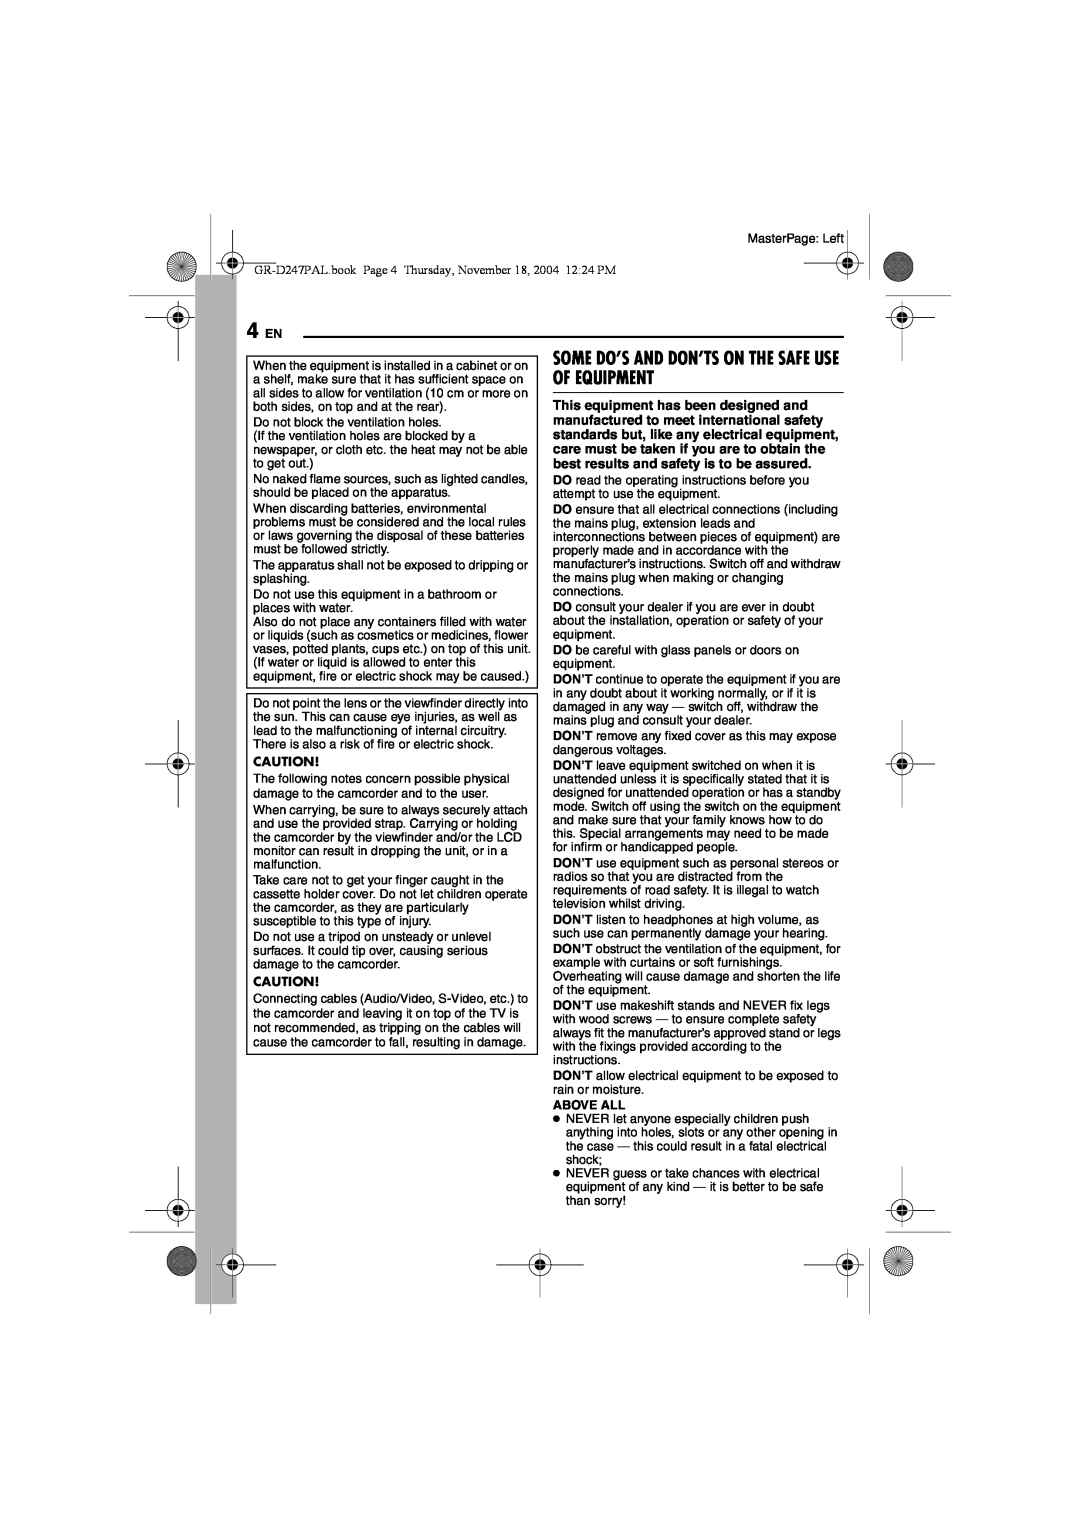 JVC GR-D247 manual 4 EN, Some Do’S And Don’Ts On The Safe Use Of Equipment, Above All 